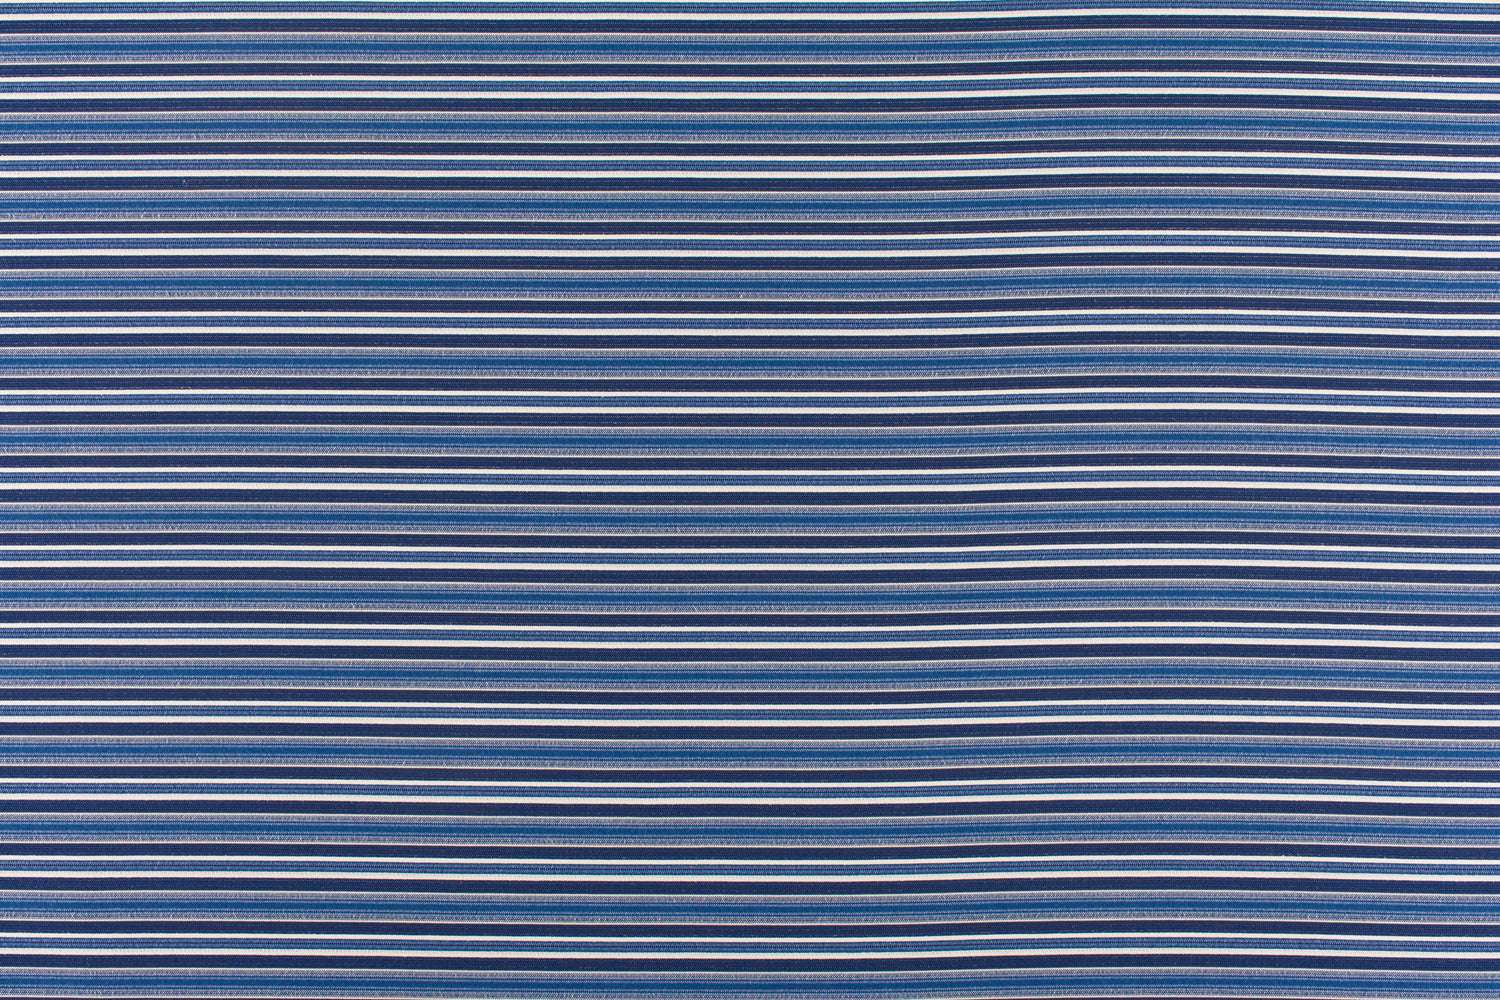 Steps Beach fabric in indigo color - pattern number WR 00012661 - by Scalamandre in the Old World Weavers collection